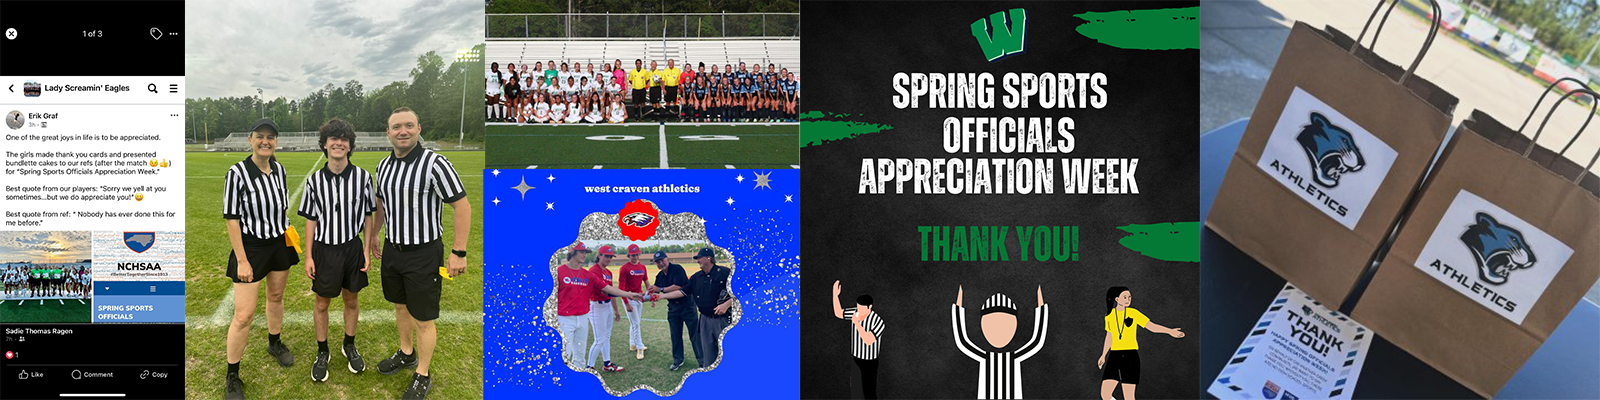 SPRING SPORTS OFFICIALS, THANK YOU!!